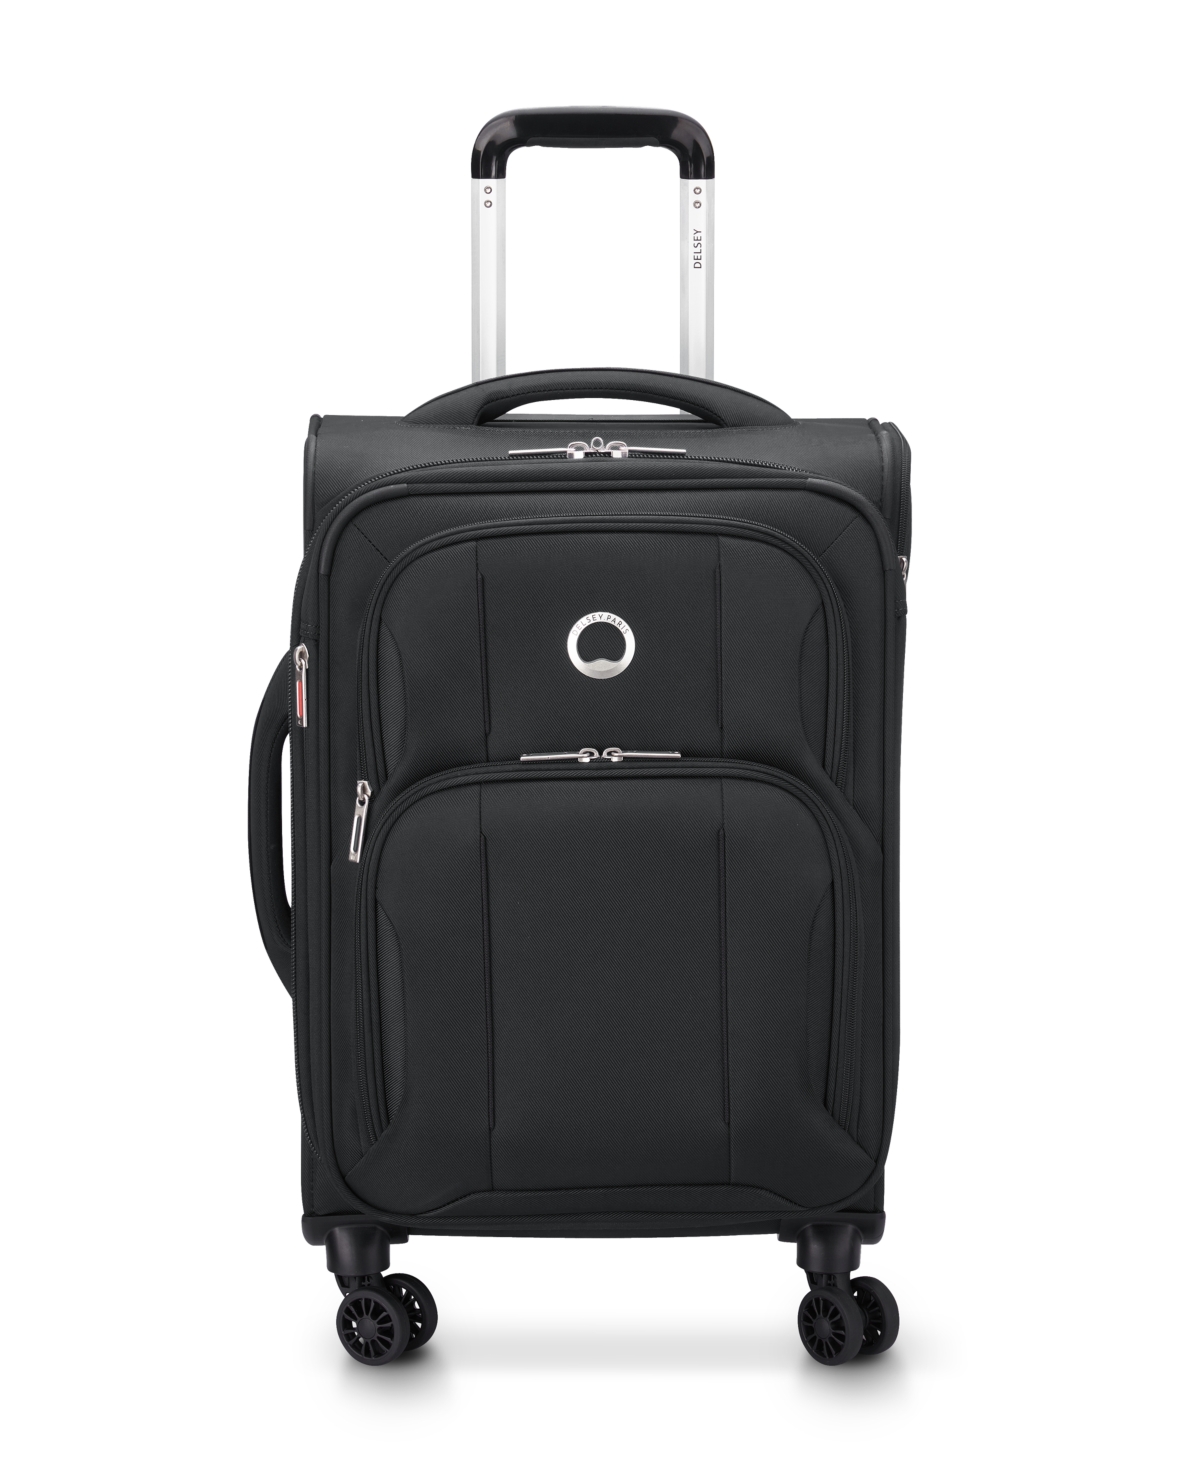 Closeout! Delsey Optimax Lite 2.0 Expandable 20" Carry-on Spinner - Black